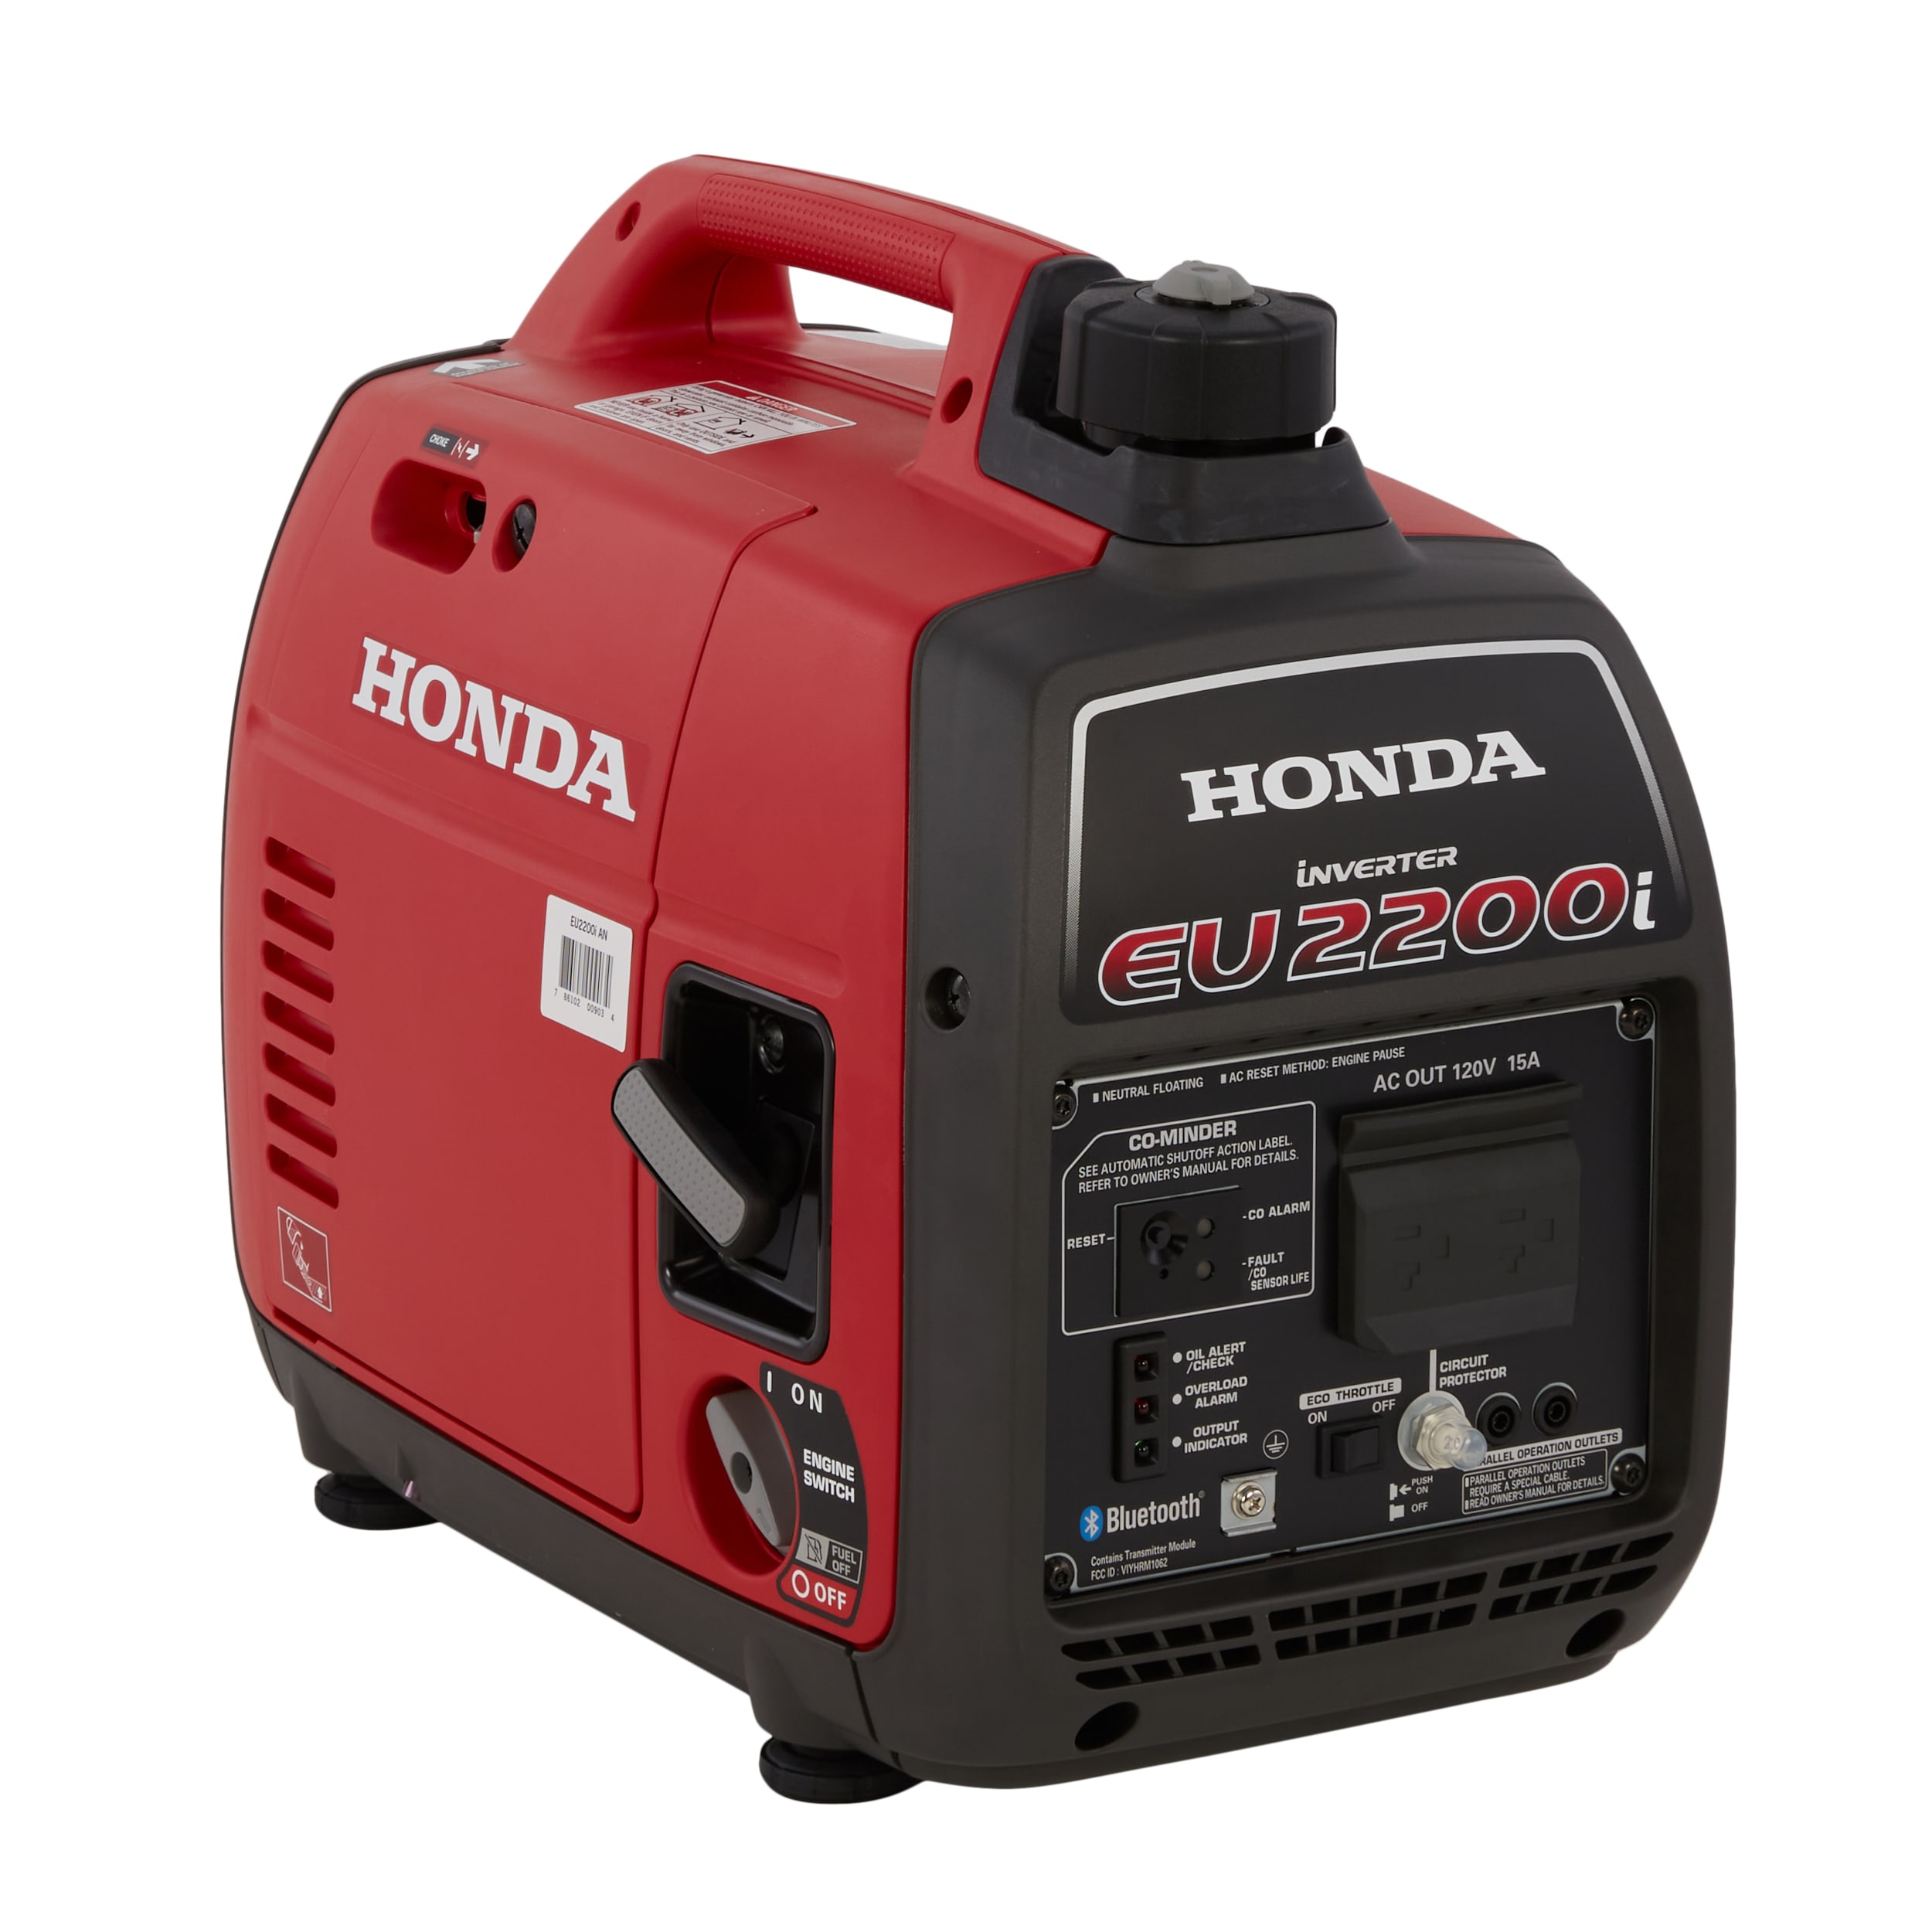 How To Find A Honda Generator Near Me